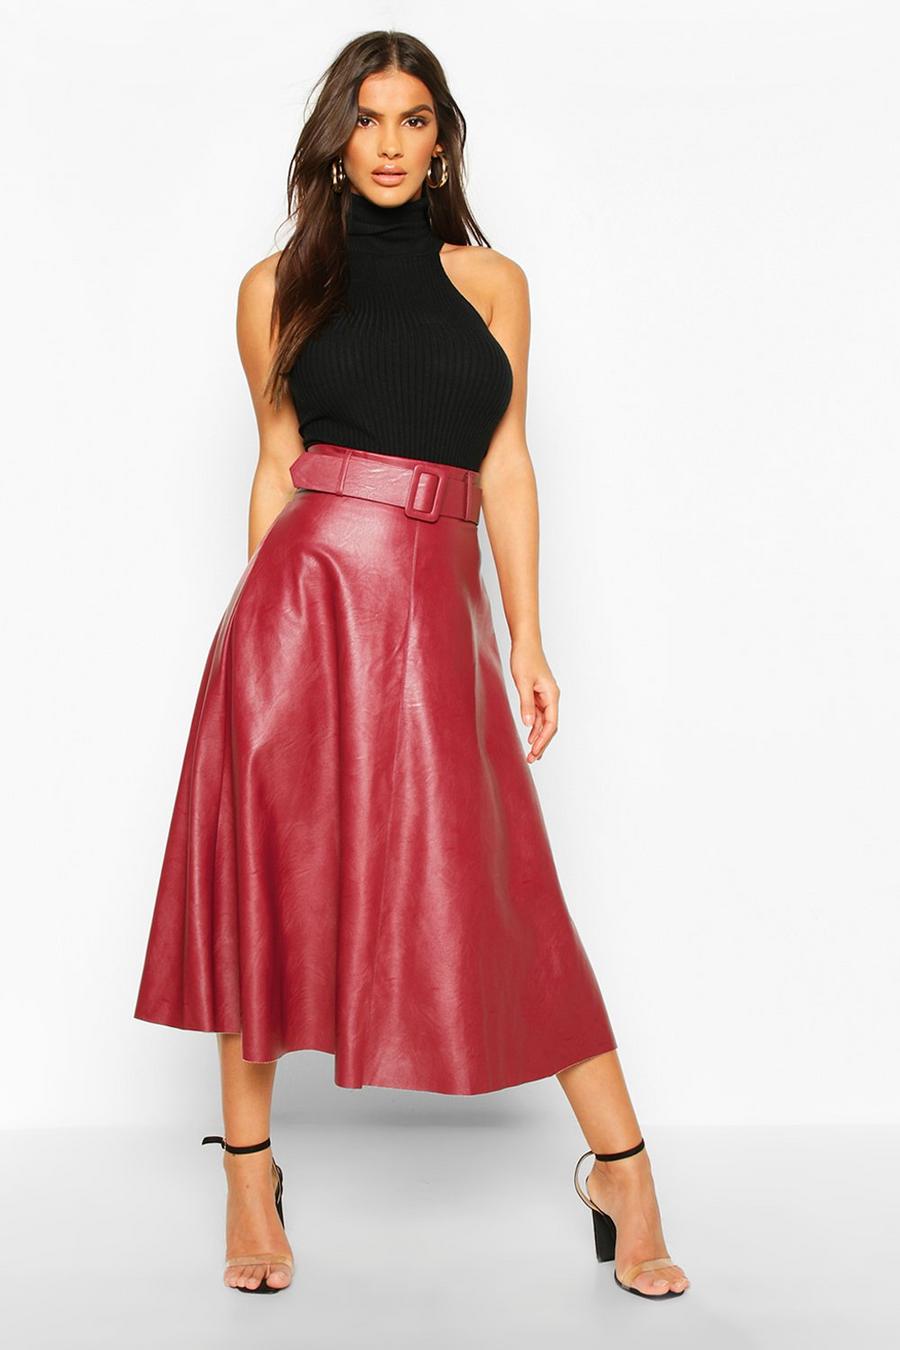 Berry red Faux Leather Self Belt Skater Skirt